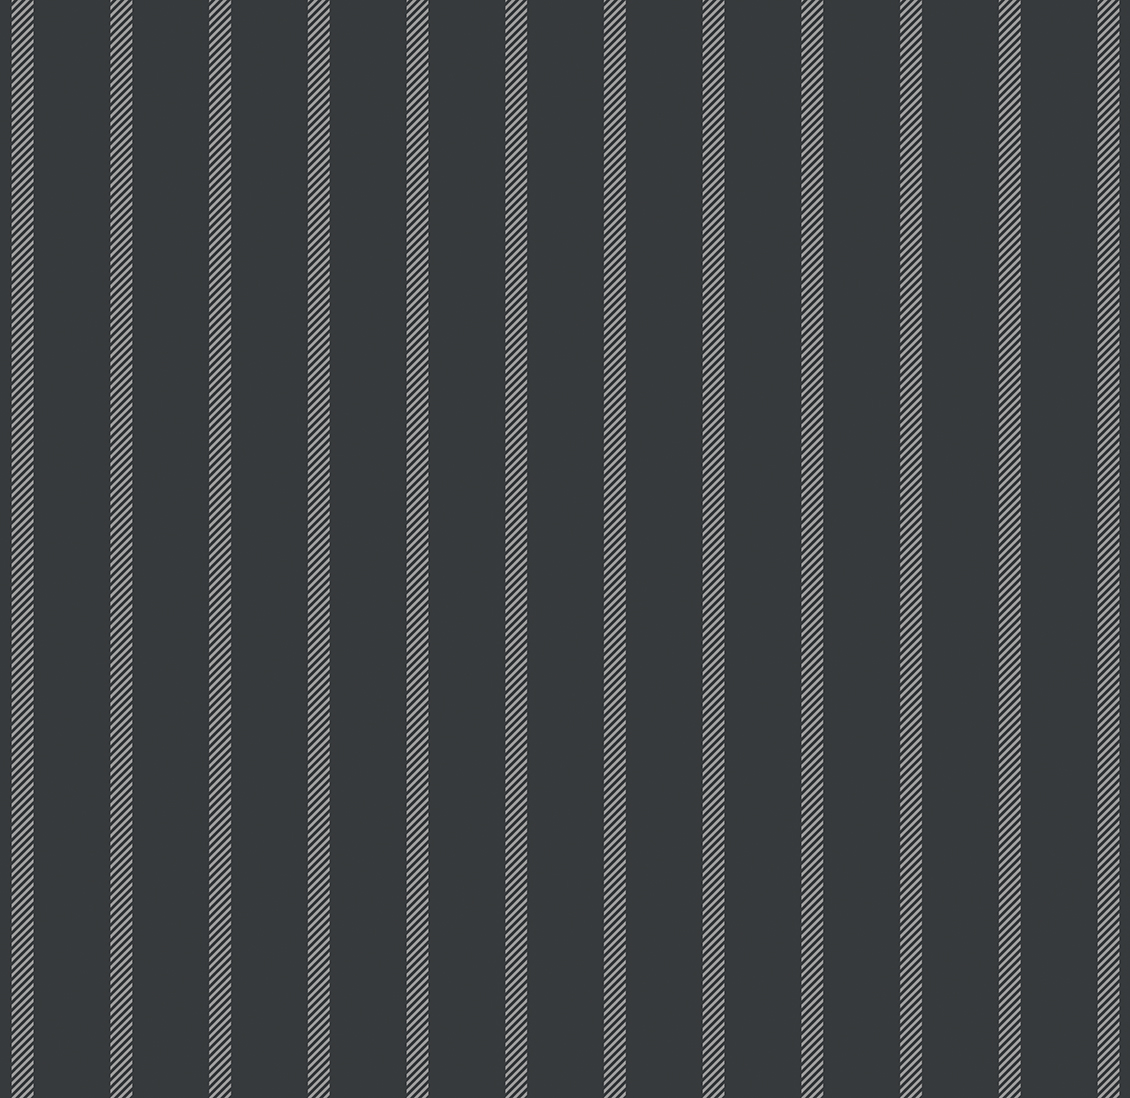 Wallpaper with white vertical stripes on a grey background, pinstripe fabric effect